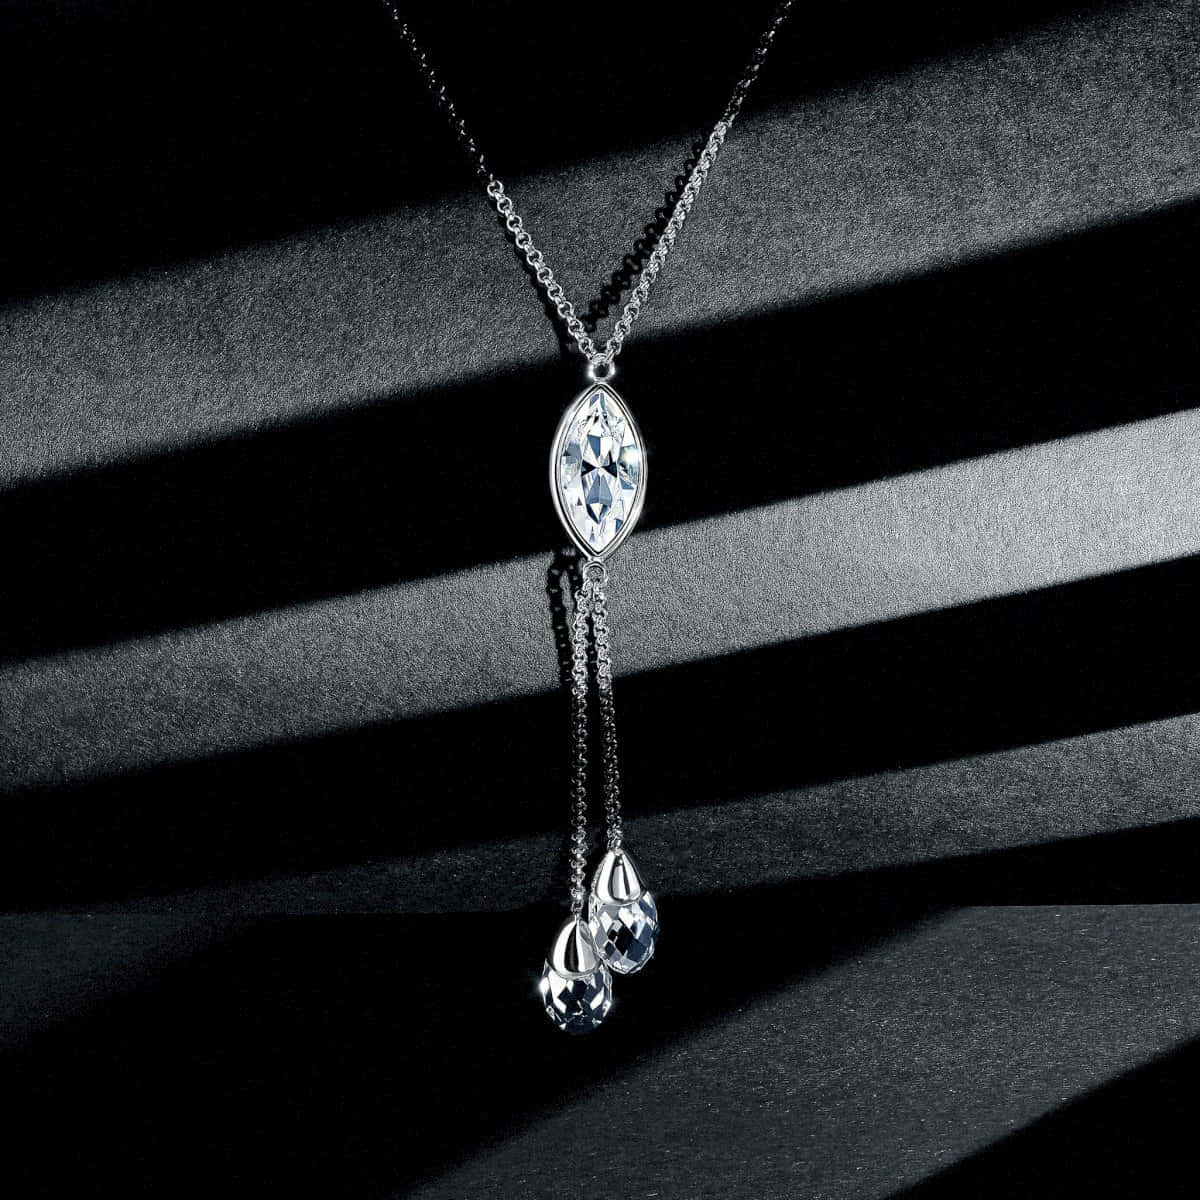 A Necklace With A Diamond Pendant On It